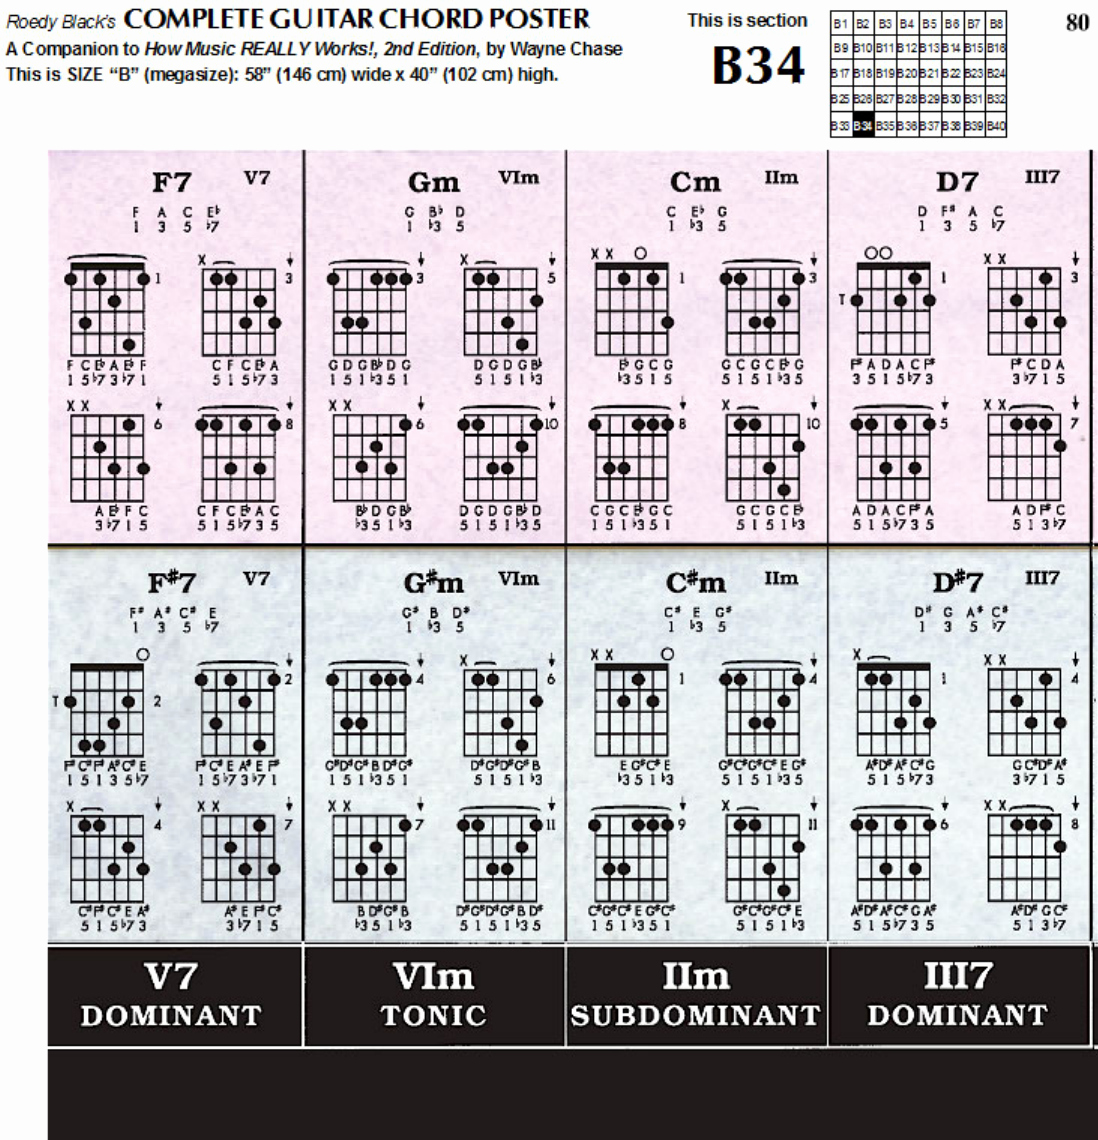 Chord Chart Guitar Complete Inspirational Download Plete Guitar Chord Chart Template for Free